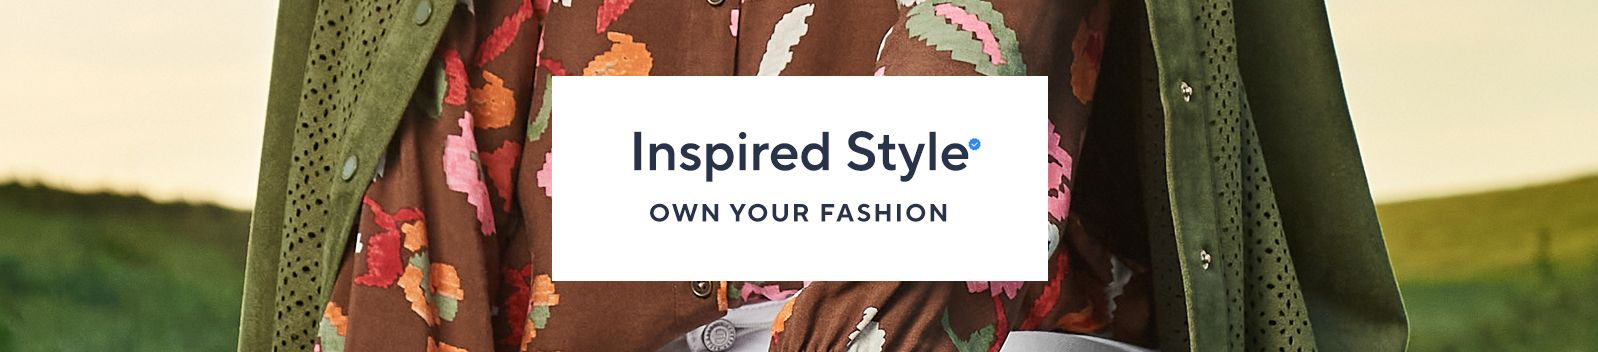 Inspired Style. Own Your Fashion